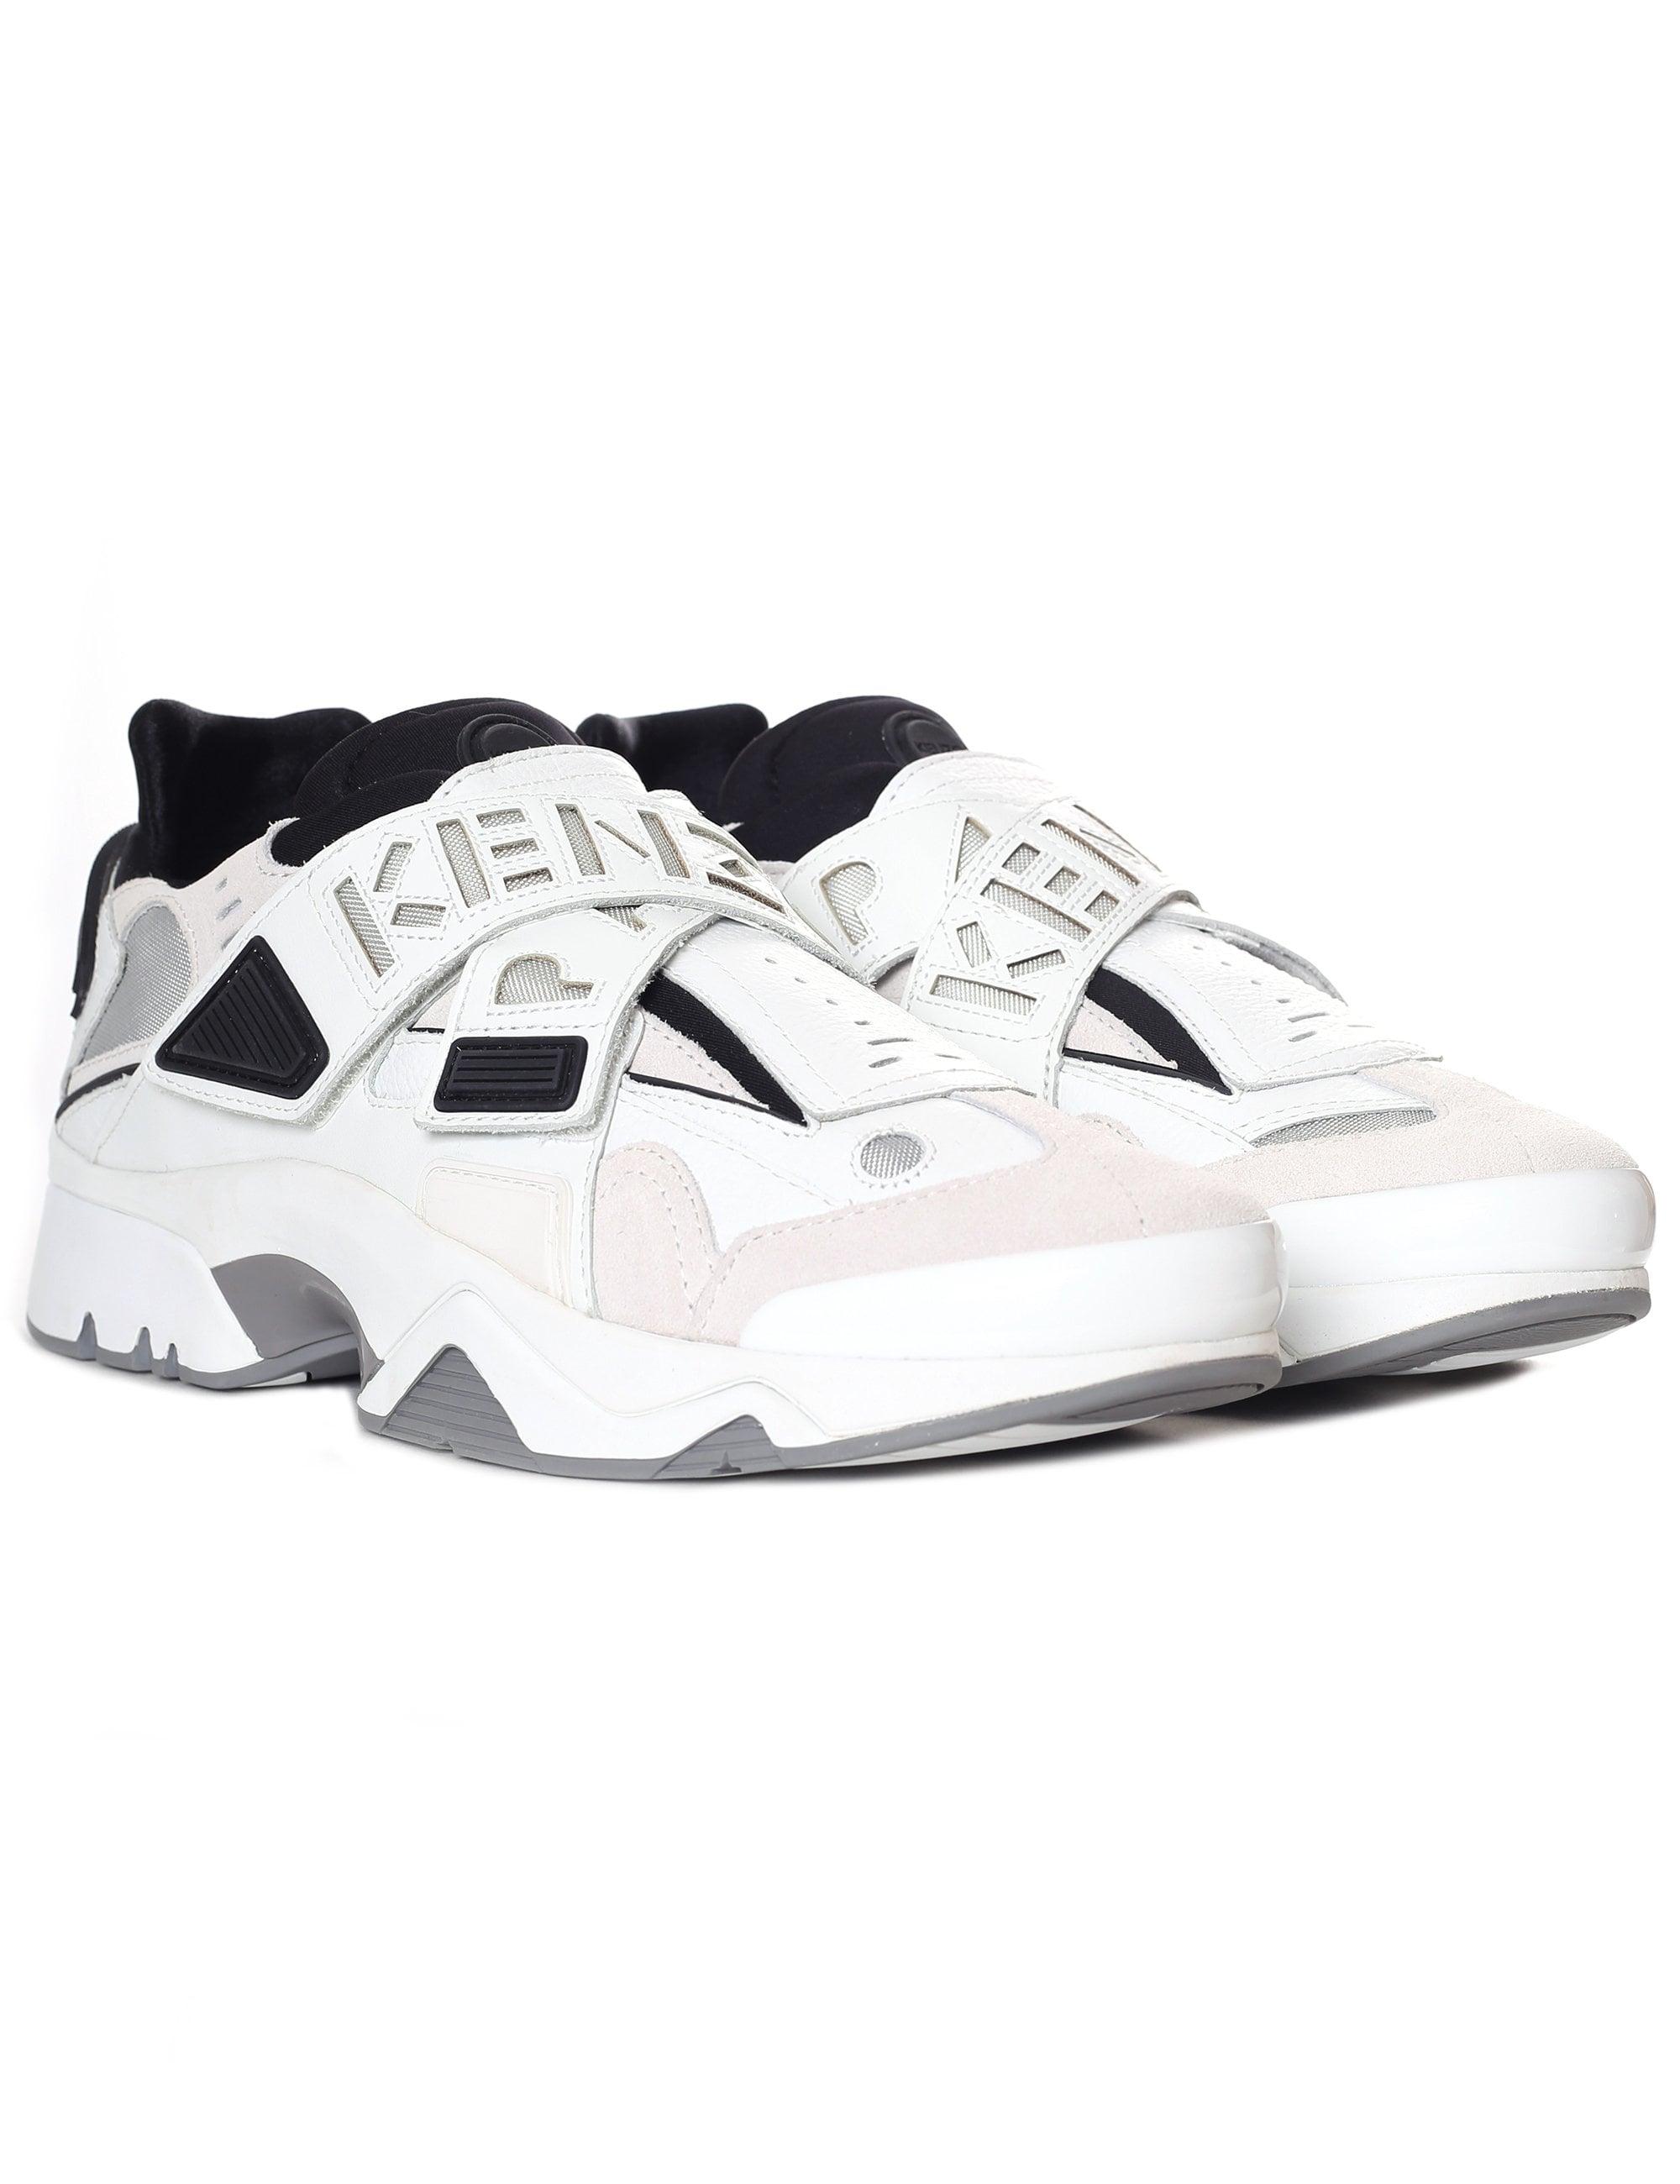 KENZO Leather Sonic Colour Trainers, Block Sneakers in Black White ...